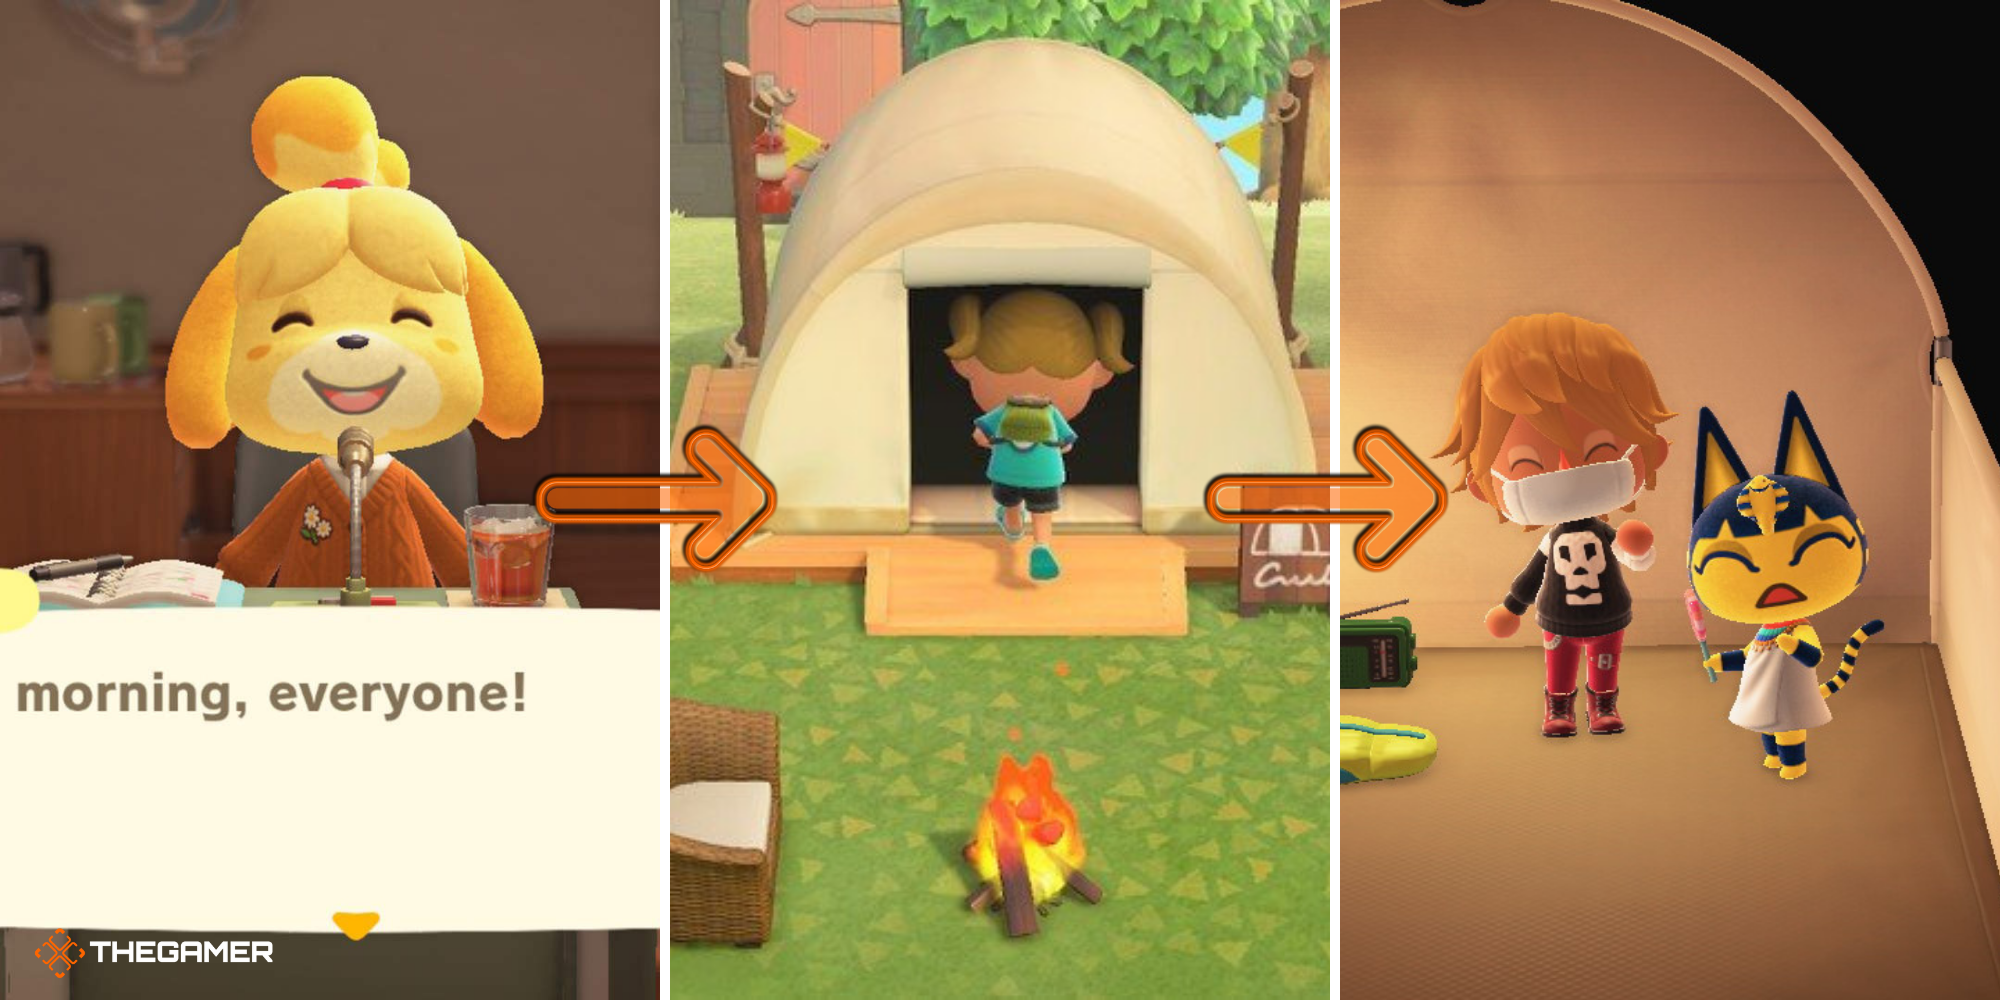 Animal Crossing New Horizons Split Image, Isabelle announcements on right, player entering the campsite in centre, player and camper waving to camera on right